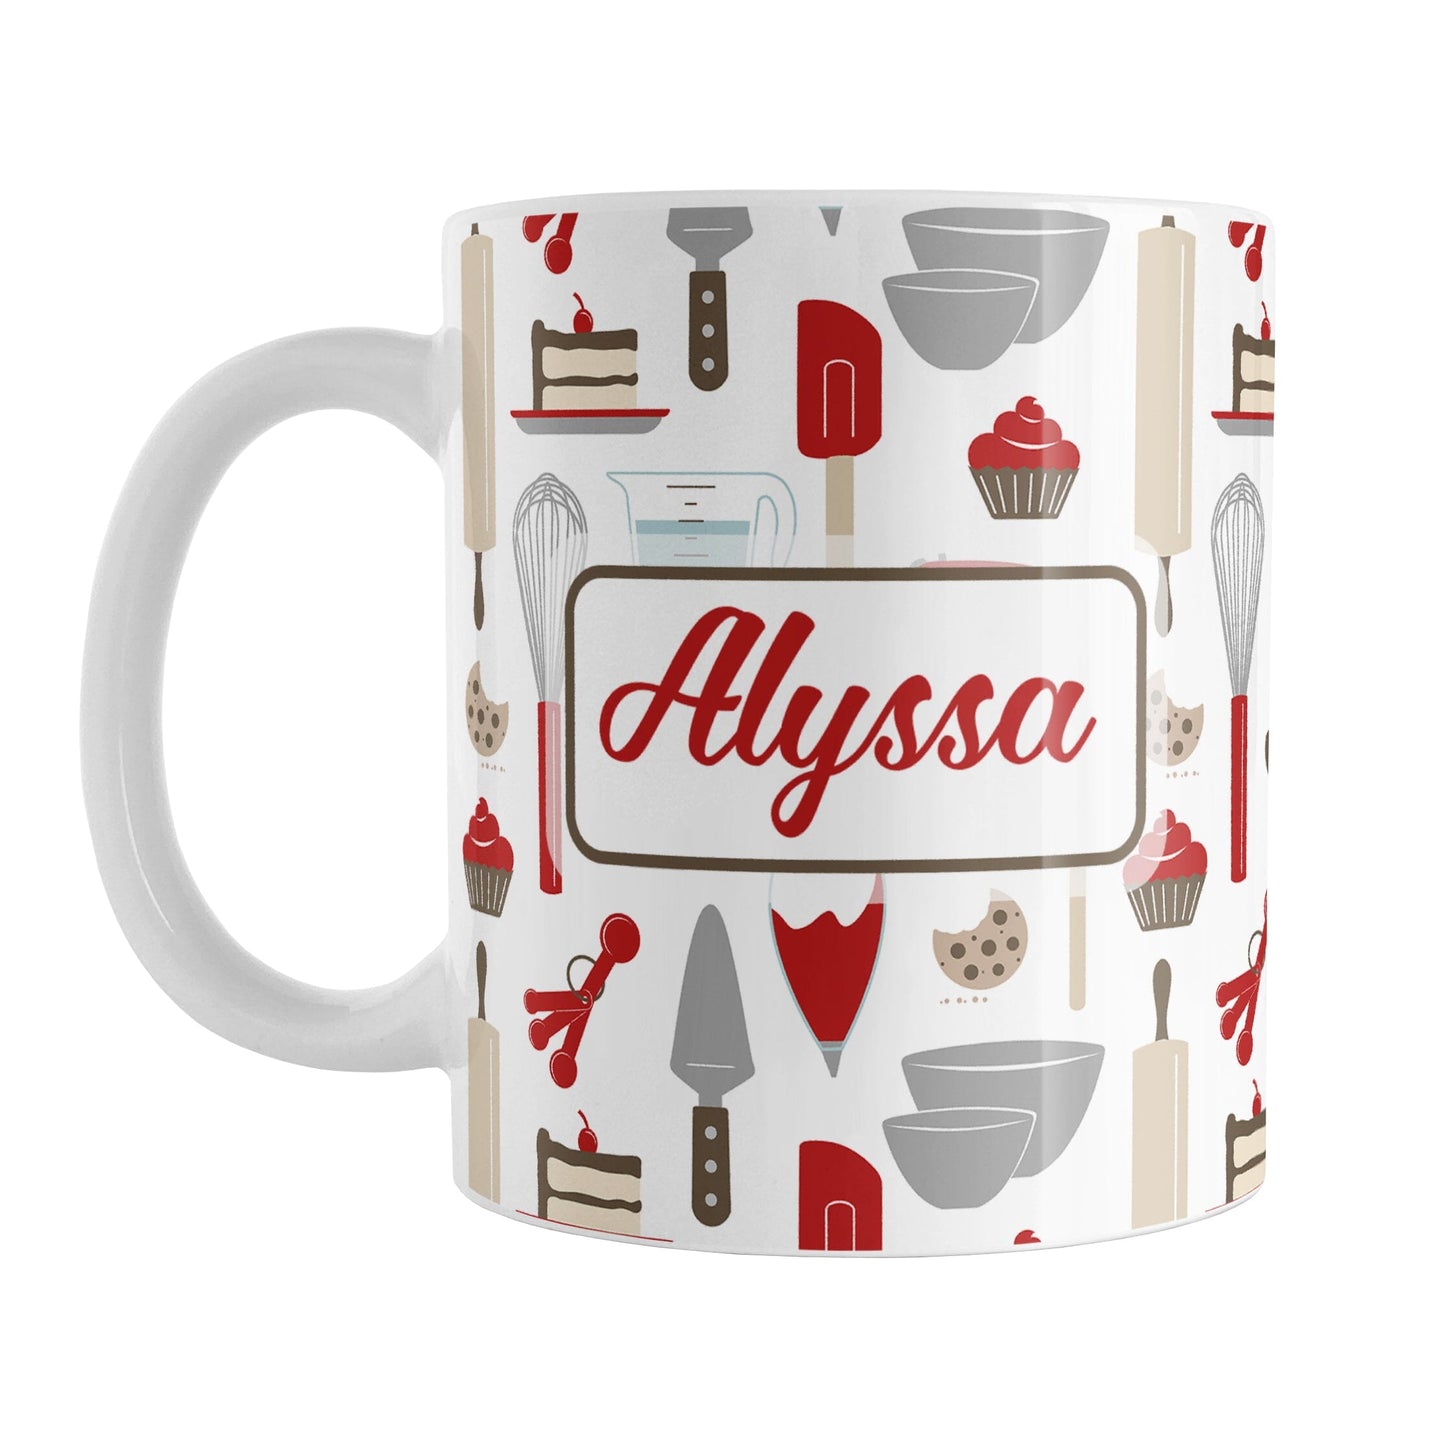 Personalized Red Baking Pattern Mug (11oz) at Amy's Coffee Mugs. A ceramic coffee mug designed with a pattern of baking tools like spatulas, whisks, mixers, bowls, and spoons, with cookies, cupcakes, and cake all in a red, gray, brown, and beige color scheme that wraps around the mug.  Your name is printed in a red script font on both sides of the mug over the baking pattern. 